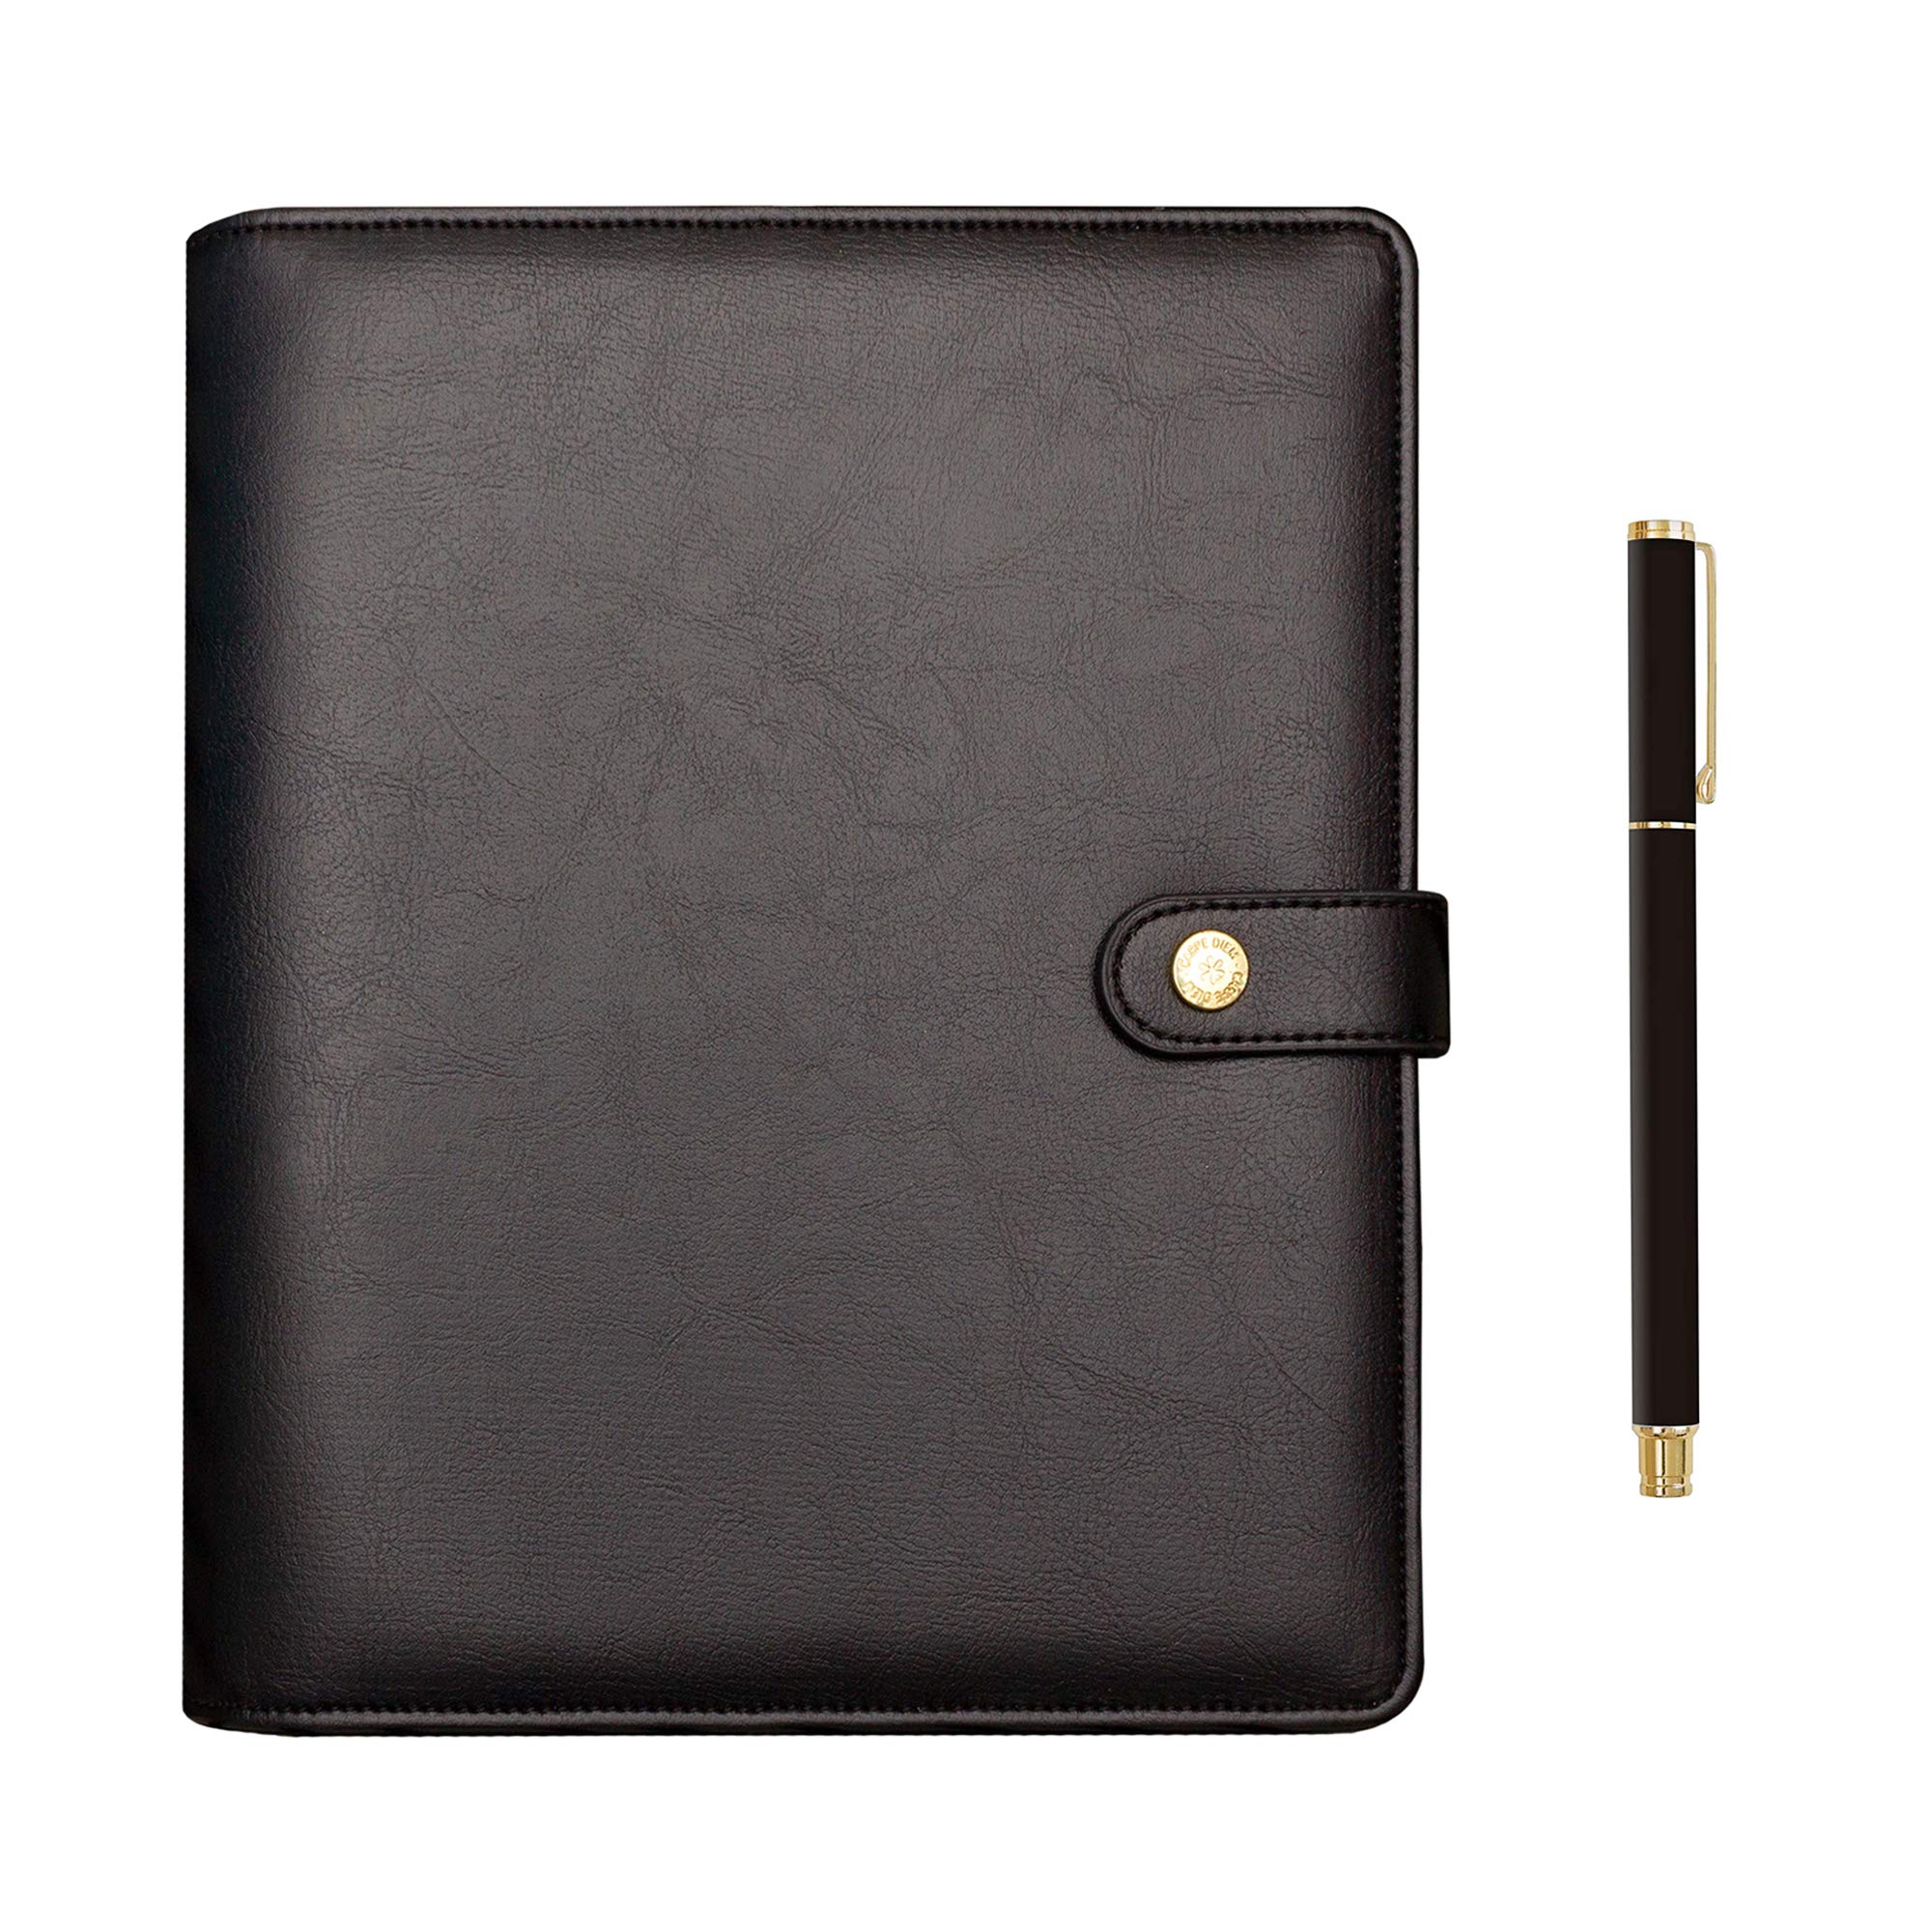 Pukka Pad, Carpe Diem Set of A5 Planner with Undated Inserts, 10 X 9.5 X 2 Inches and Matching Metal Gel Pen in a Giftbox, Black